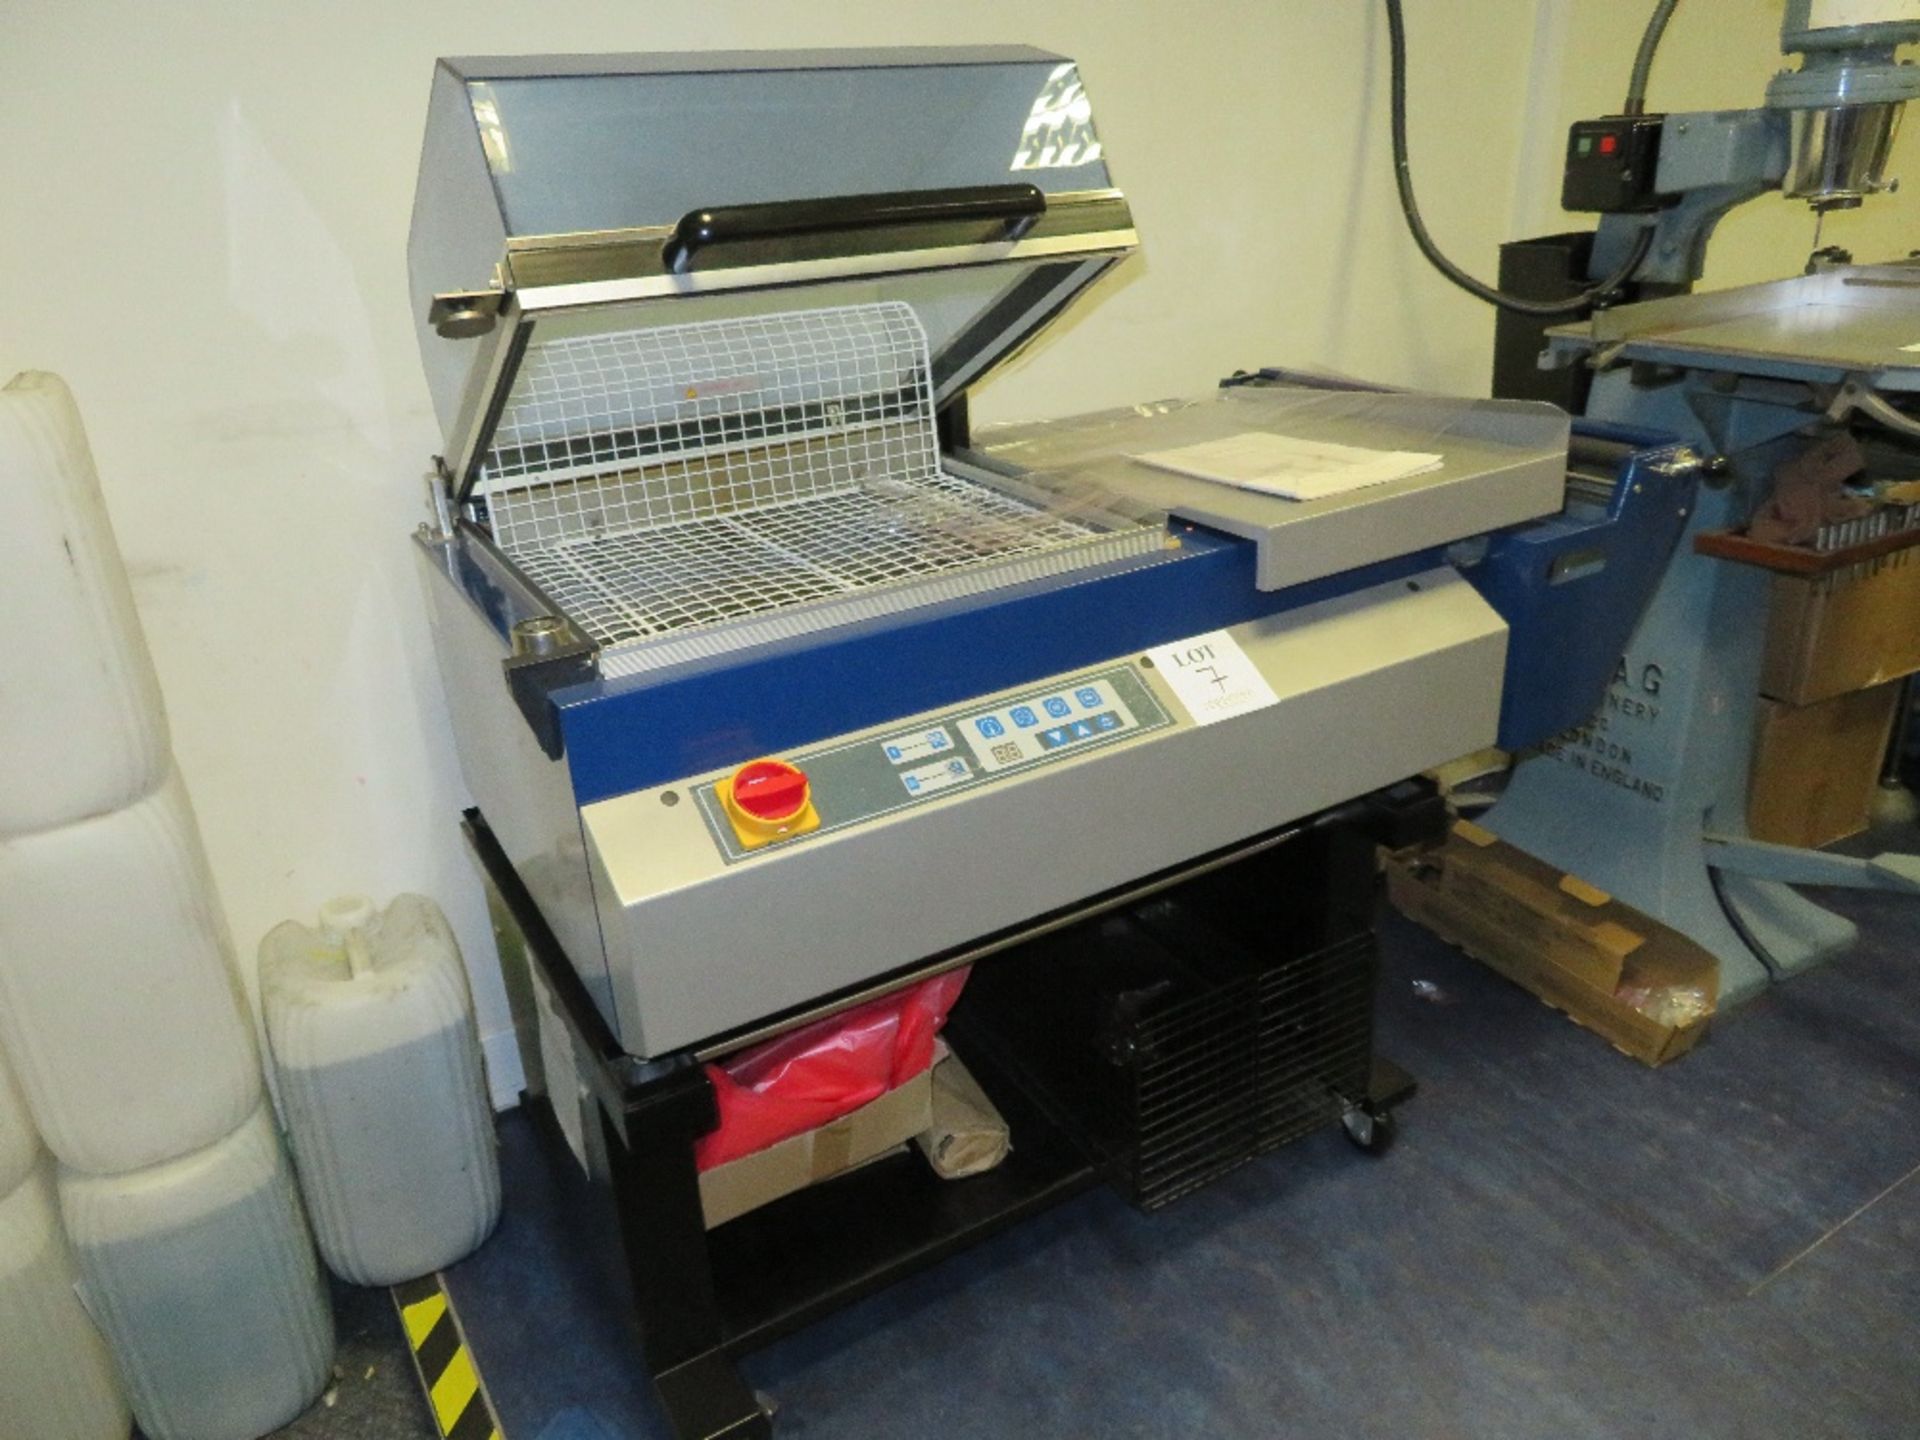 Heat Shrink Wrapping Machine Model EKH-455 A3 , Serial Number H1610030370, Date 10/2016 - Image 2 of 4